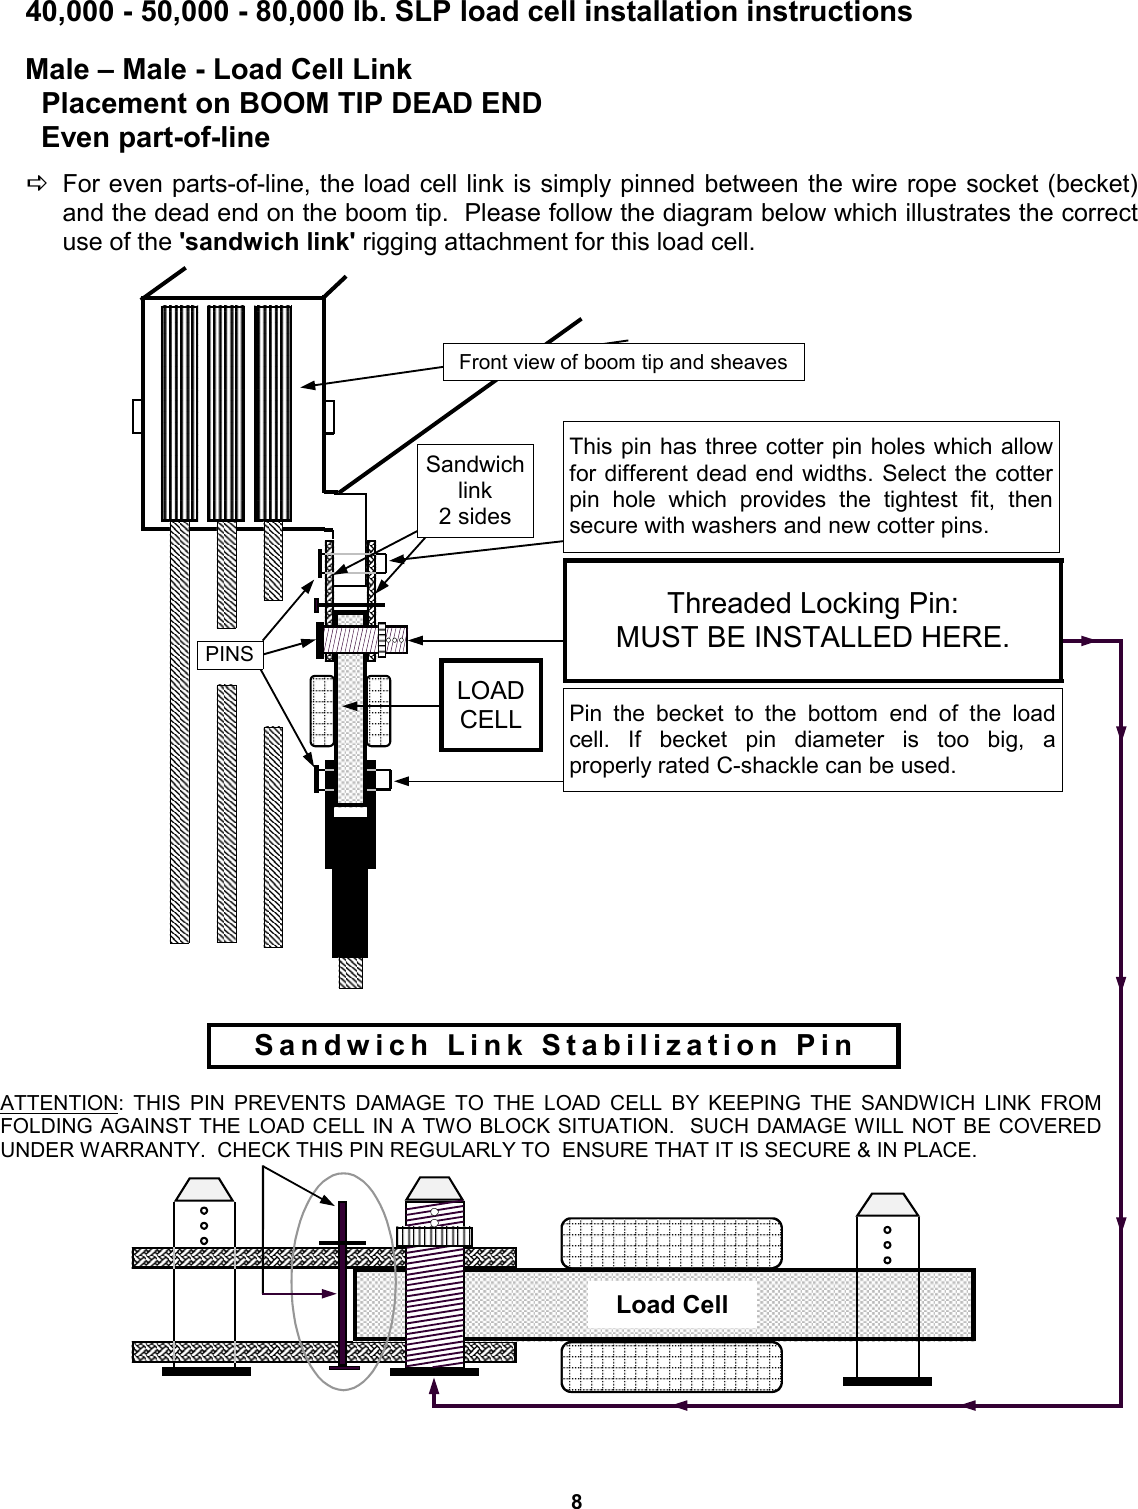 8 40,000 - 50,000 - 80,000 lb. SLP load cell installation instructions Male – Male - Load Cell Link    Placement on BOOM TIP DEAD END   Even part-of-line   DFor even parts-of-line, the load cell link is simply pinned between the wire rope socket (becket) and the dead end on the boom tip.  Please follow the diagram below which illustrates the correct use of the &apos;sandwich link&apos; rigging attachment for this load cell. Sandwich link 2 sides LOAD CELL Front view of boom tip and sheaves This pin has three cotter pin holes which allow for different dead end widths. Select the cotter pin hole which provides the tightest fit, then   secure with washers and new cotter pins. Pin the becket to the bottom end of the load cell.  If  becket  pin  diameter  is  too  big,  a       properly rated C-shackle can be used. Threaded Locking Pin: MUST BE INSTALLED HERE. ATTENTION: THIS PIN PREVENTS DAMAGE TO THE LOAD CELL BY KEEPING THE SANDWICH LINK FROM FOLDING AGAINST THE LOAD CELL IN A TWO BLOCK SITUATION.  SUCH DAMAGE WILL NOT BE COVERED UNDER WARRANTY.  CHECK THIS PIN REGULARLY TO  ENSURE THAT IT IS SECURE &amp; IN PLACE. Sandwich Link Stabilization Pin Load Cell PINS 